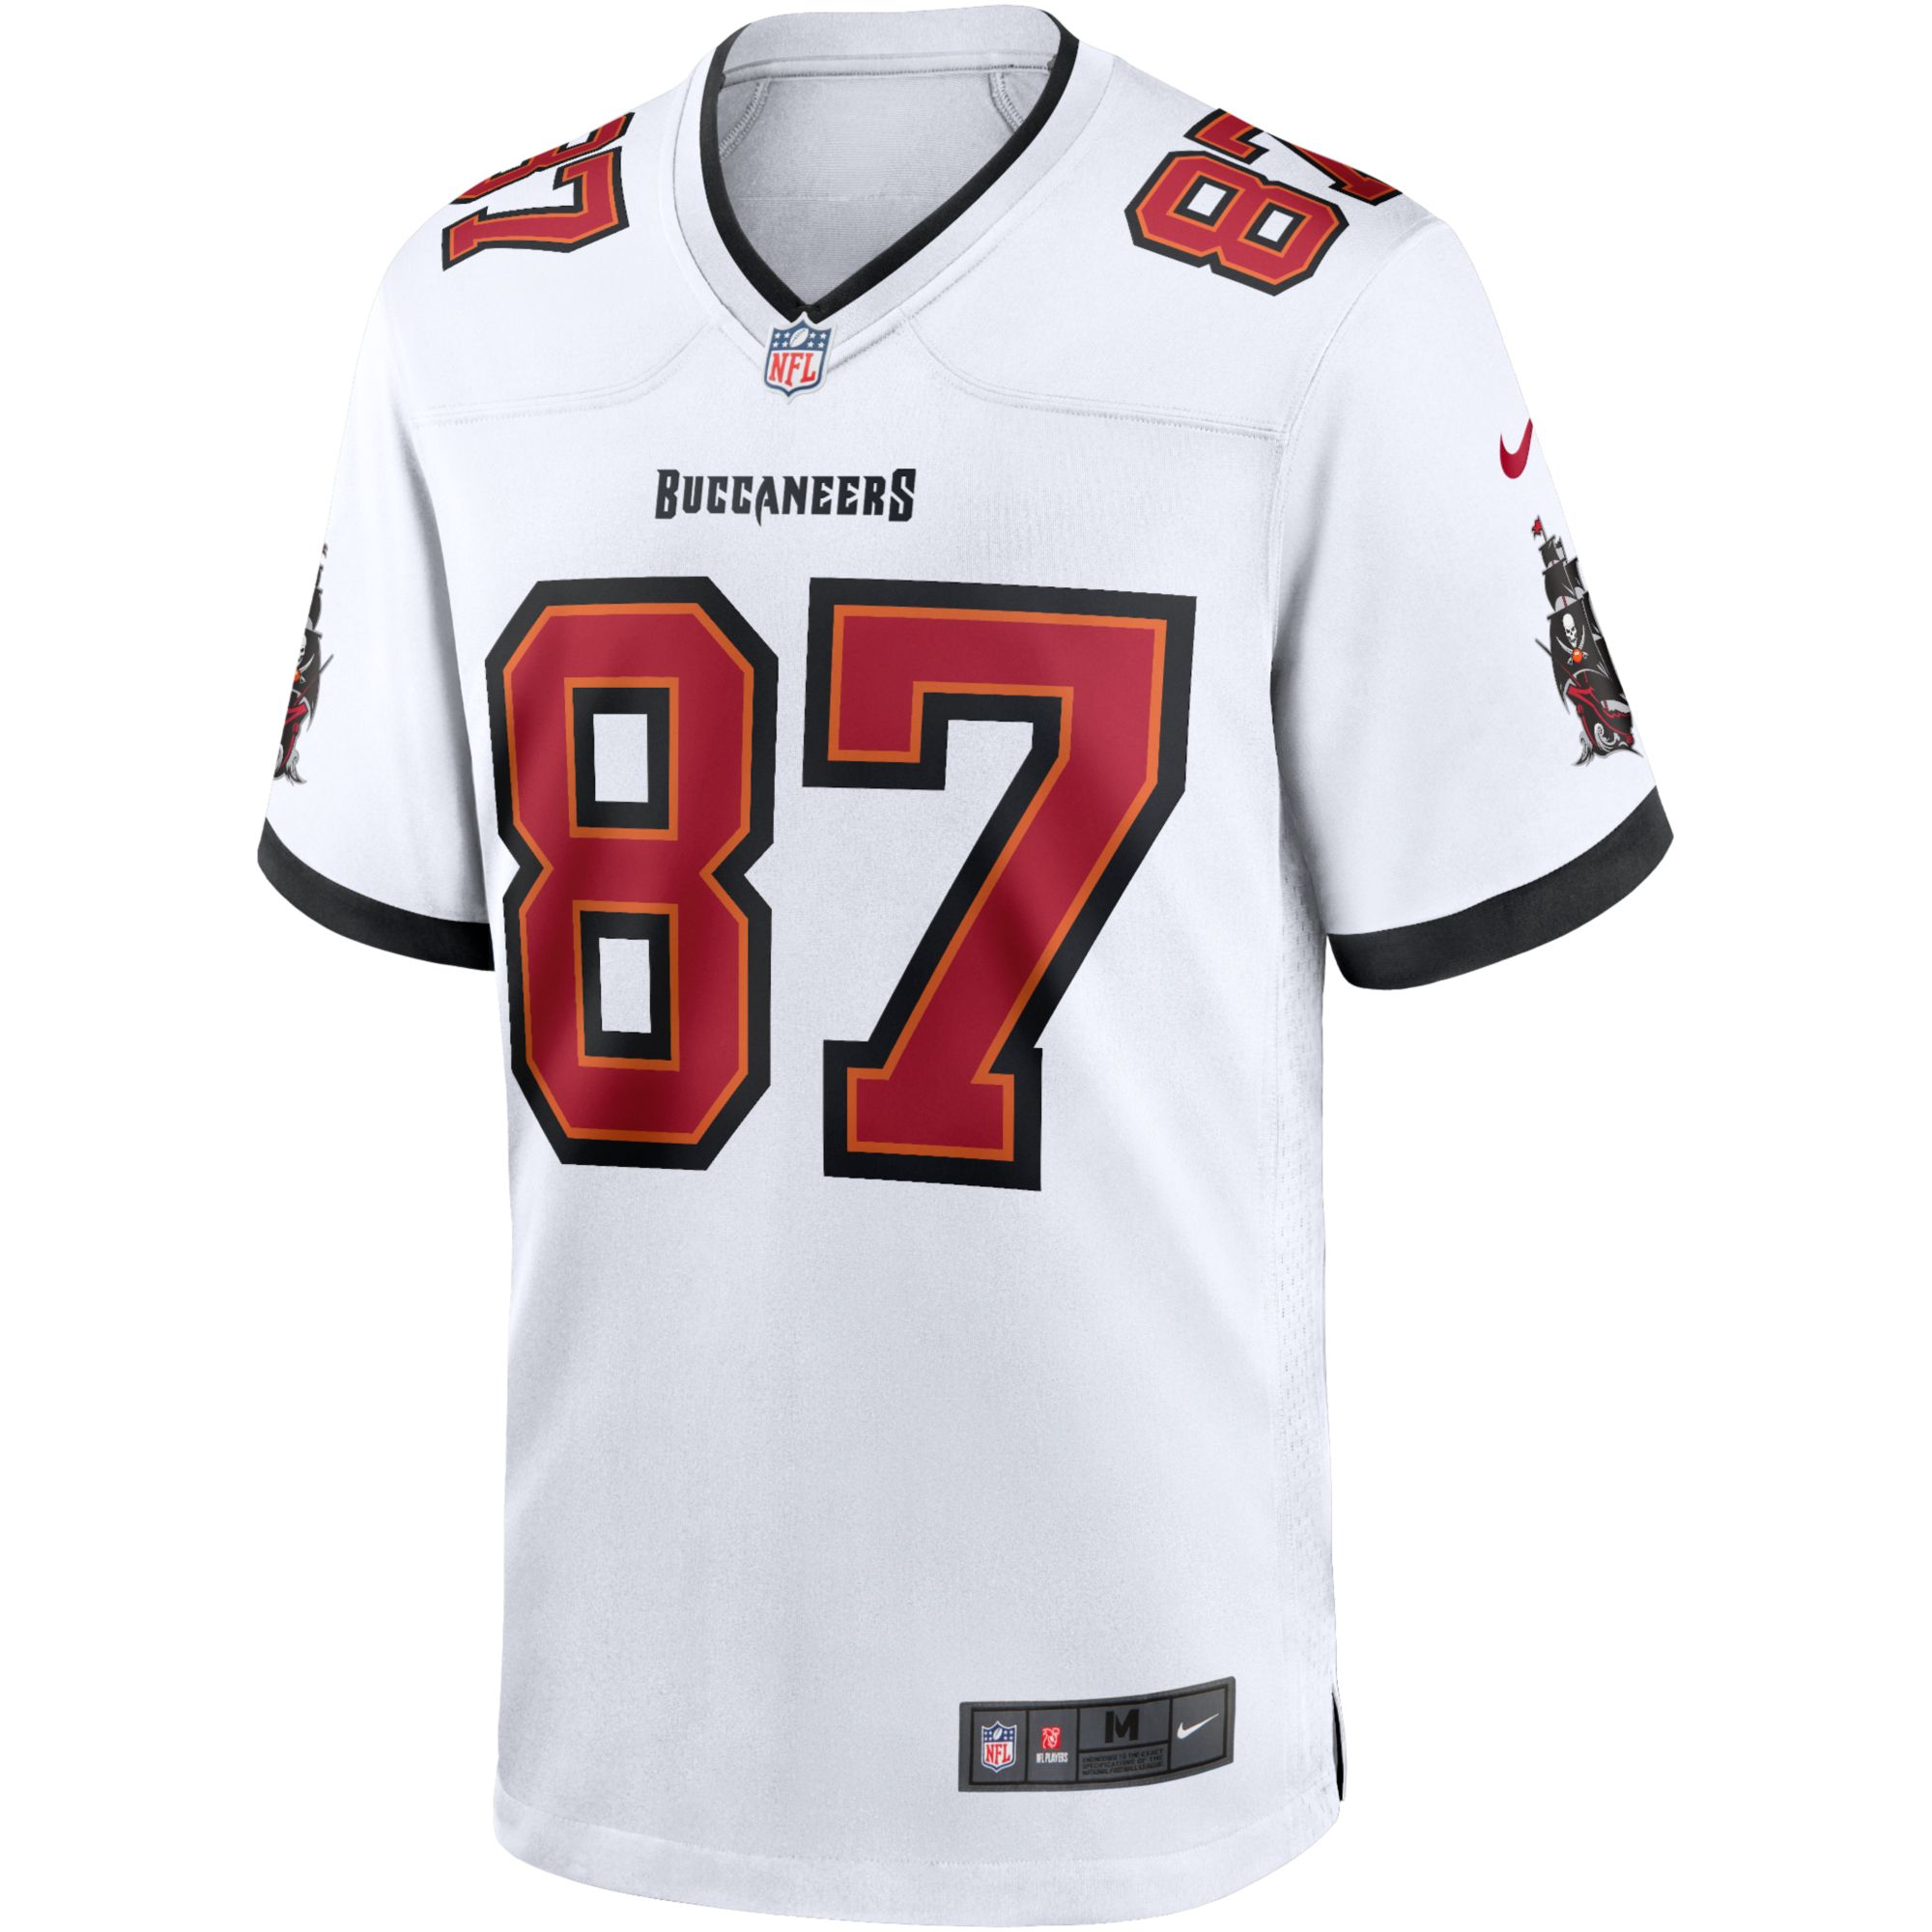 tampa gronk jersey